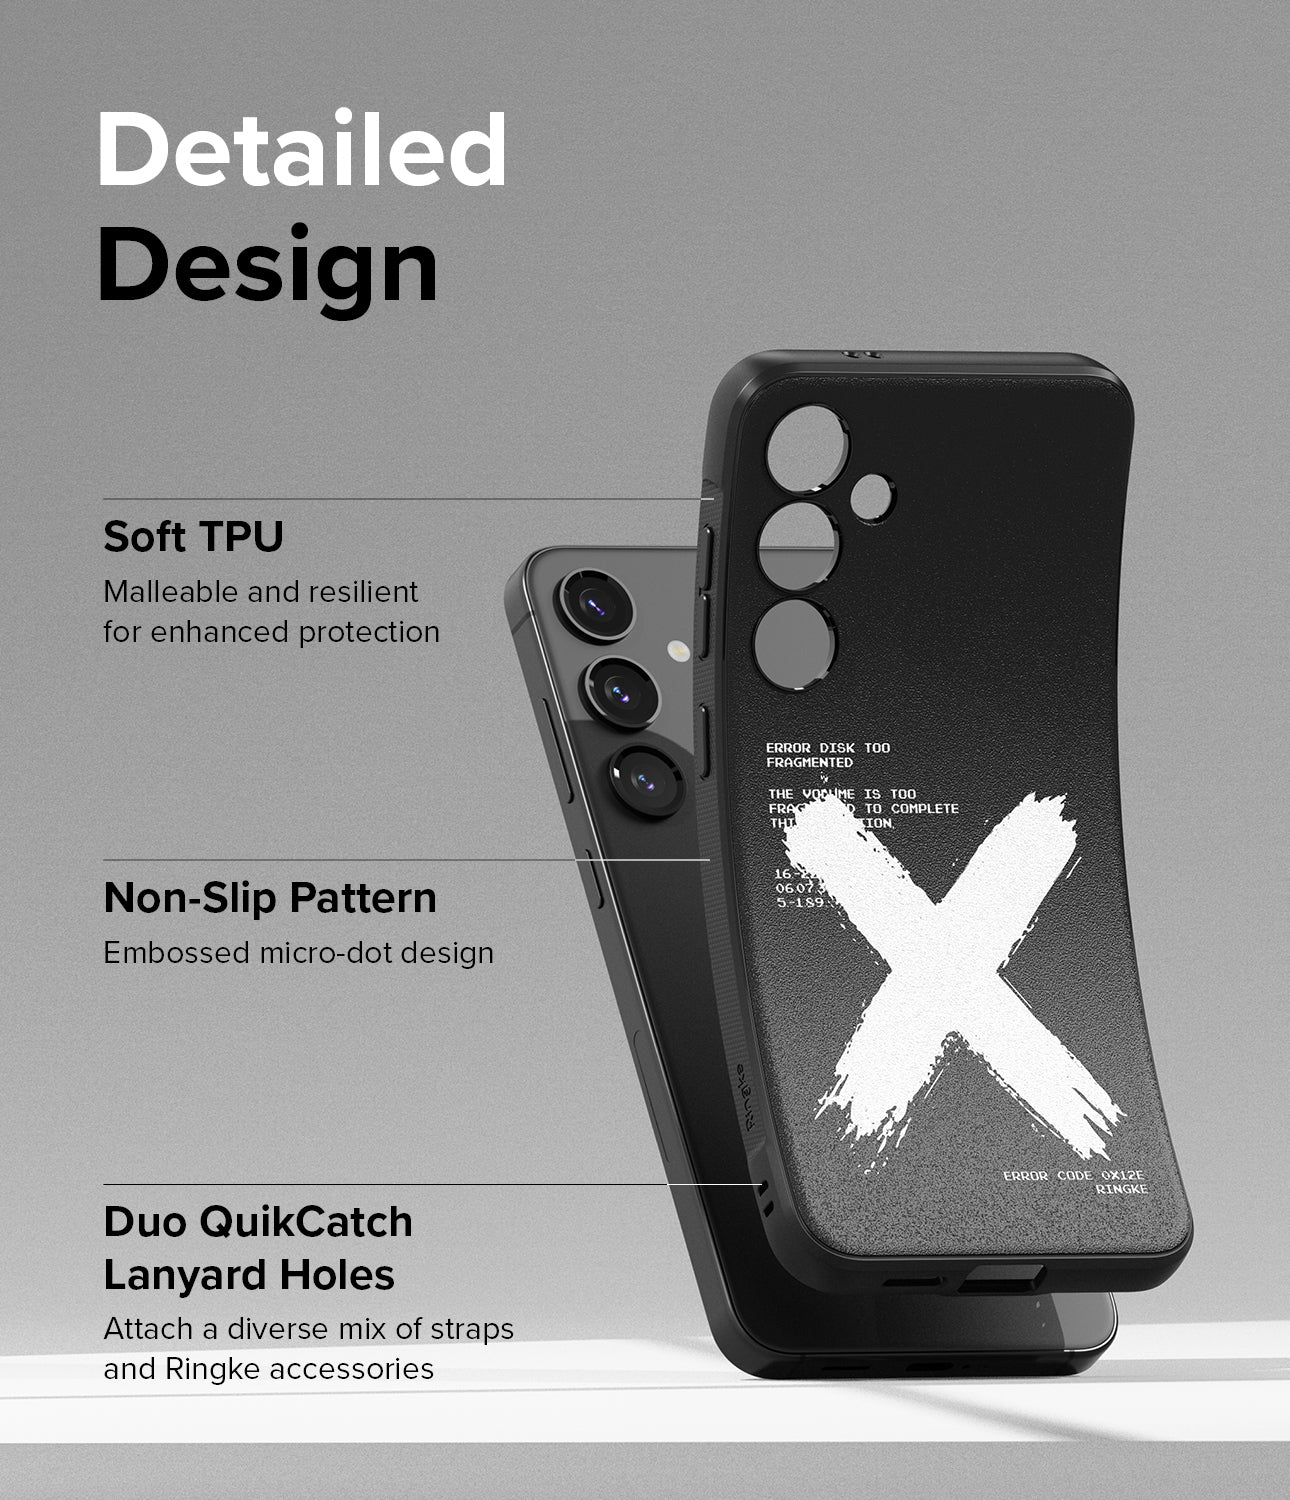 Galaxy S24 Plus Case | Onyx Design - X - Detailed Design. Malleable and resilient for enhanced protection with Soft TPU. Embossed micro-dot design with Non-Slip Pattern. Attach a diverse mix of straps and Ringke accessories with Duo QuikCatch Lanyard Holes.